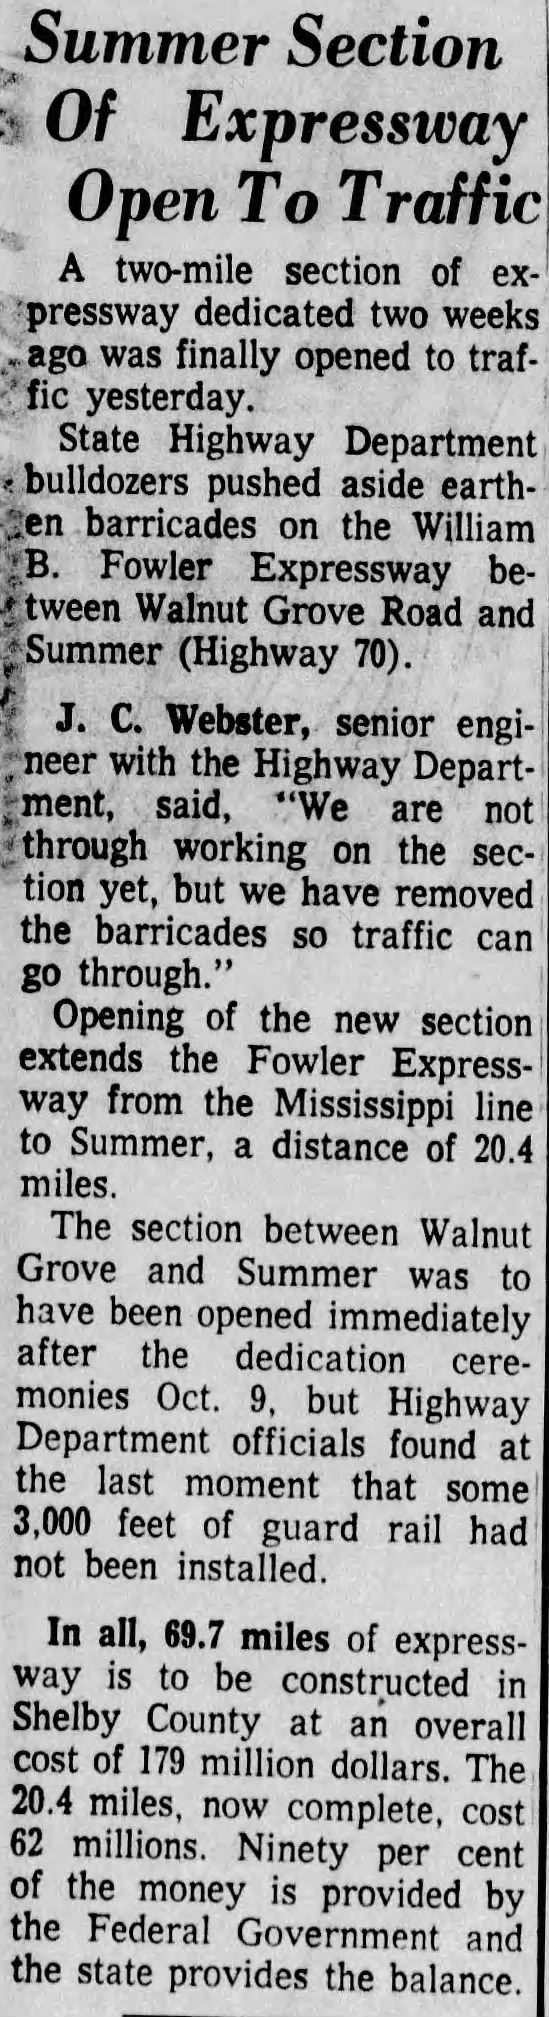 Summer Section Of Expressway Open To Traffic